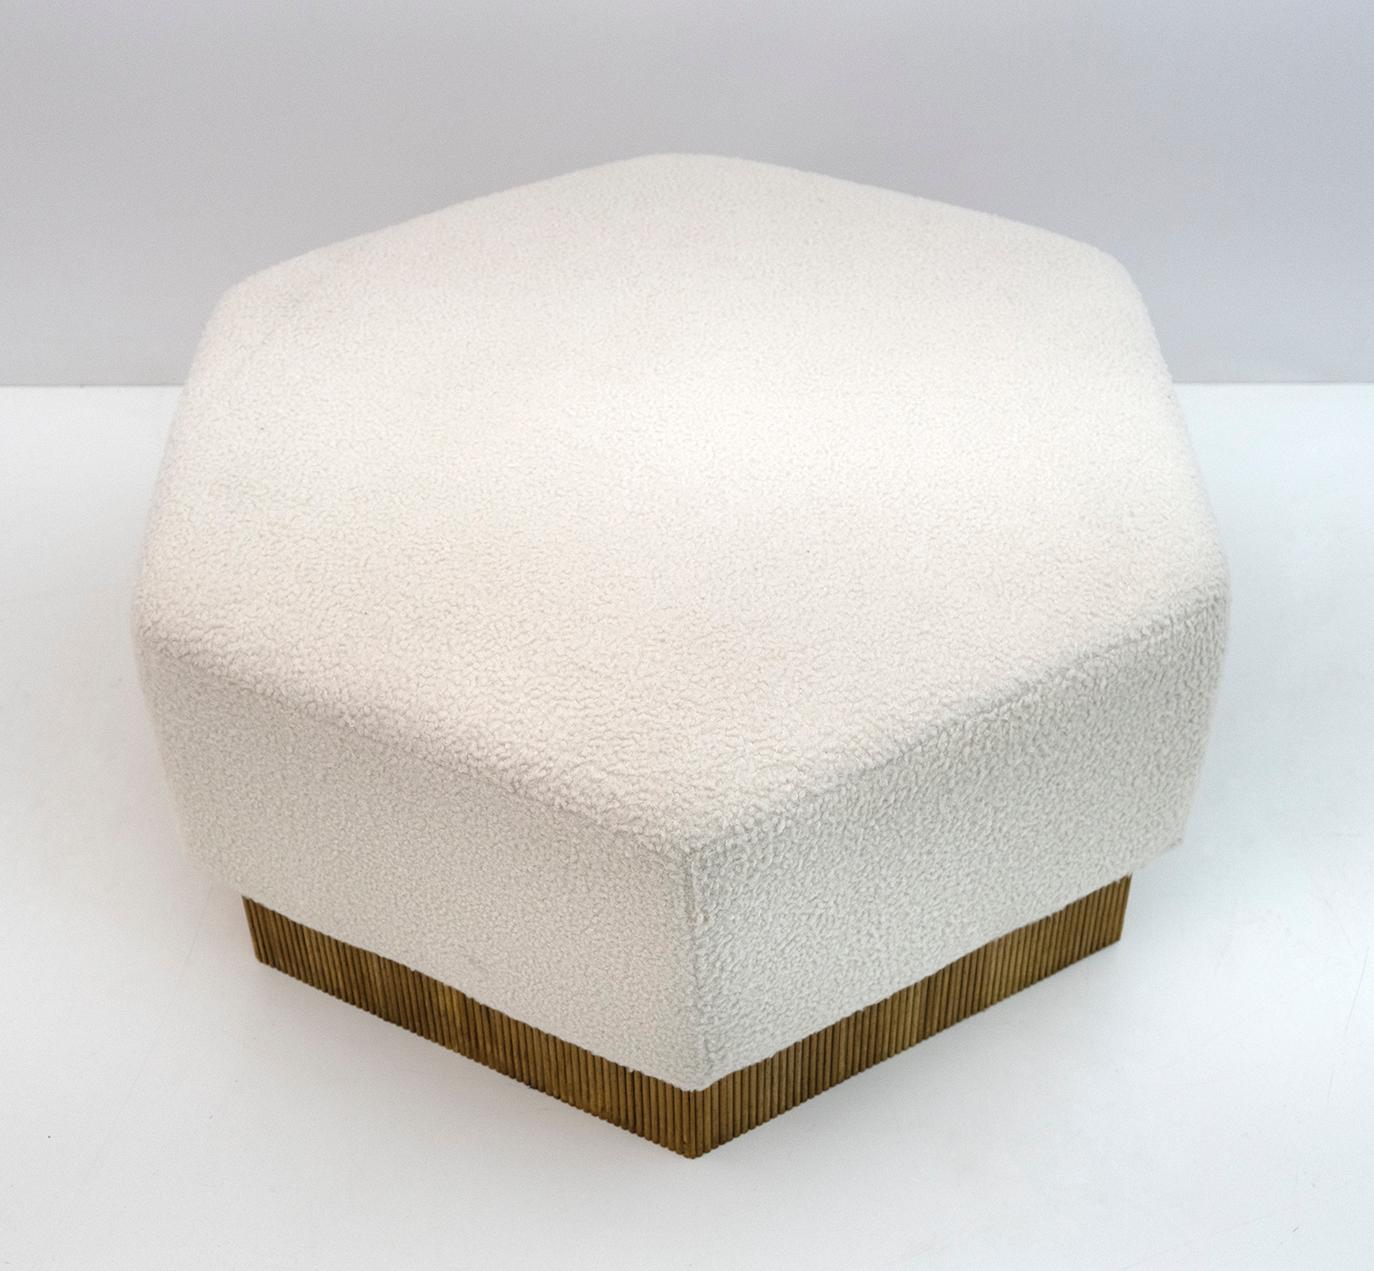 Italian Hexagonal Pouf in Soft White Boucle with Wooden Base, Italy